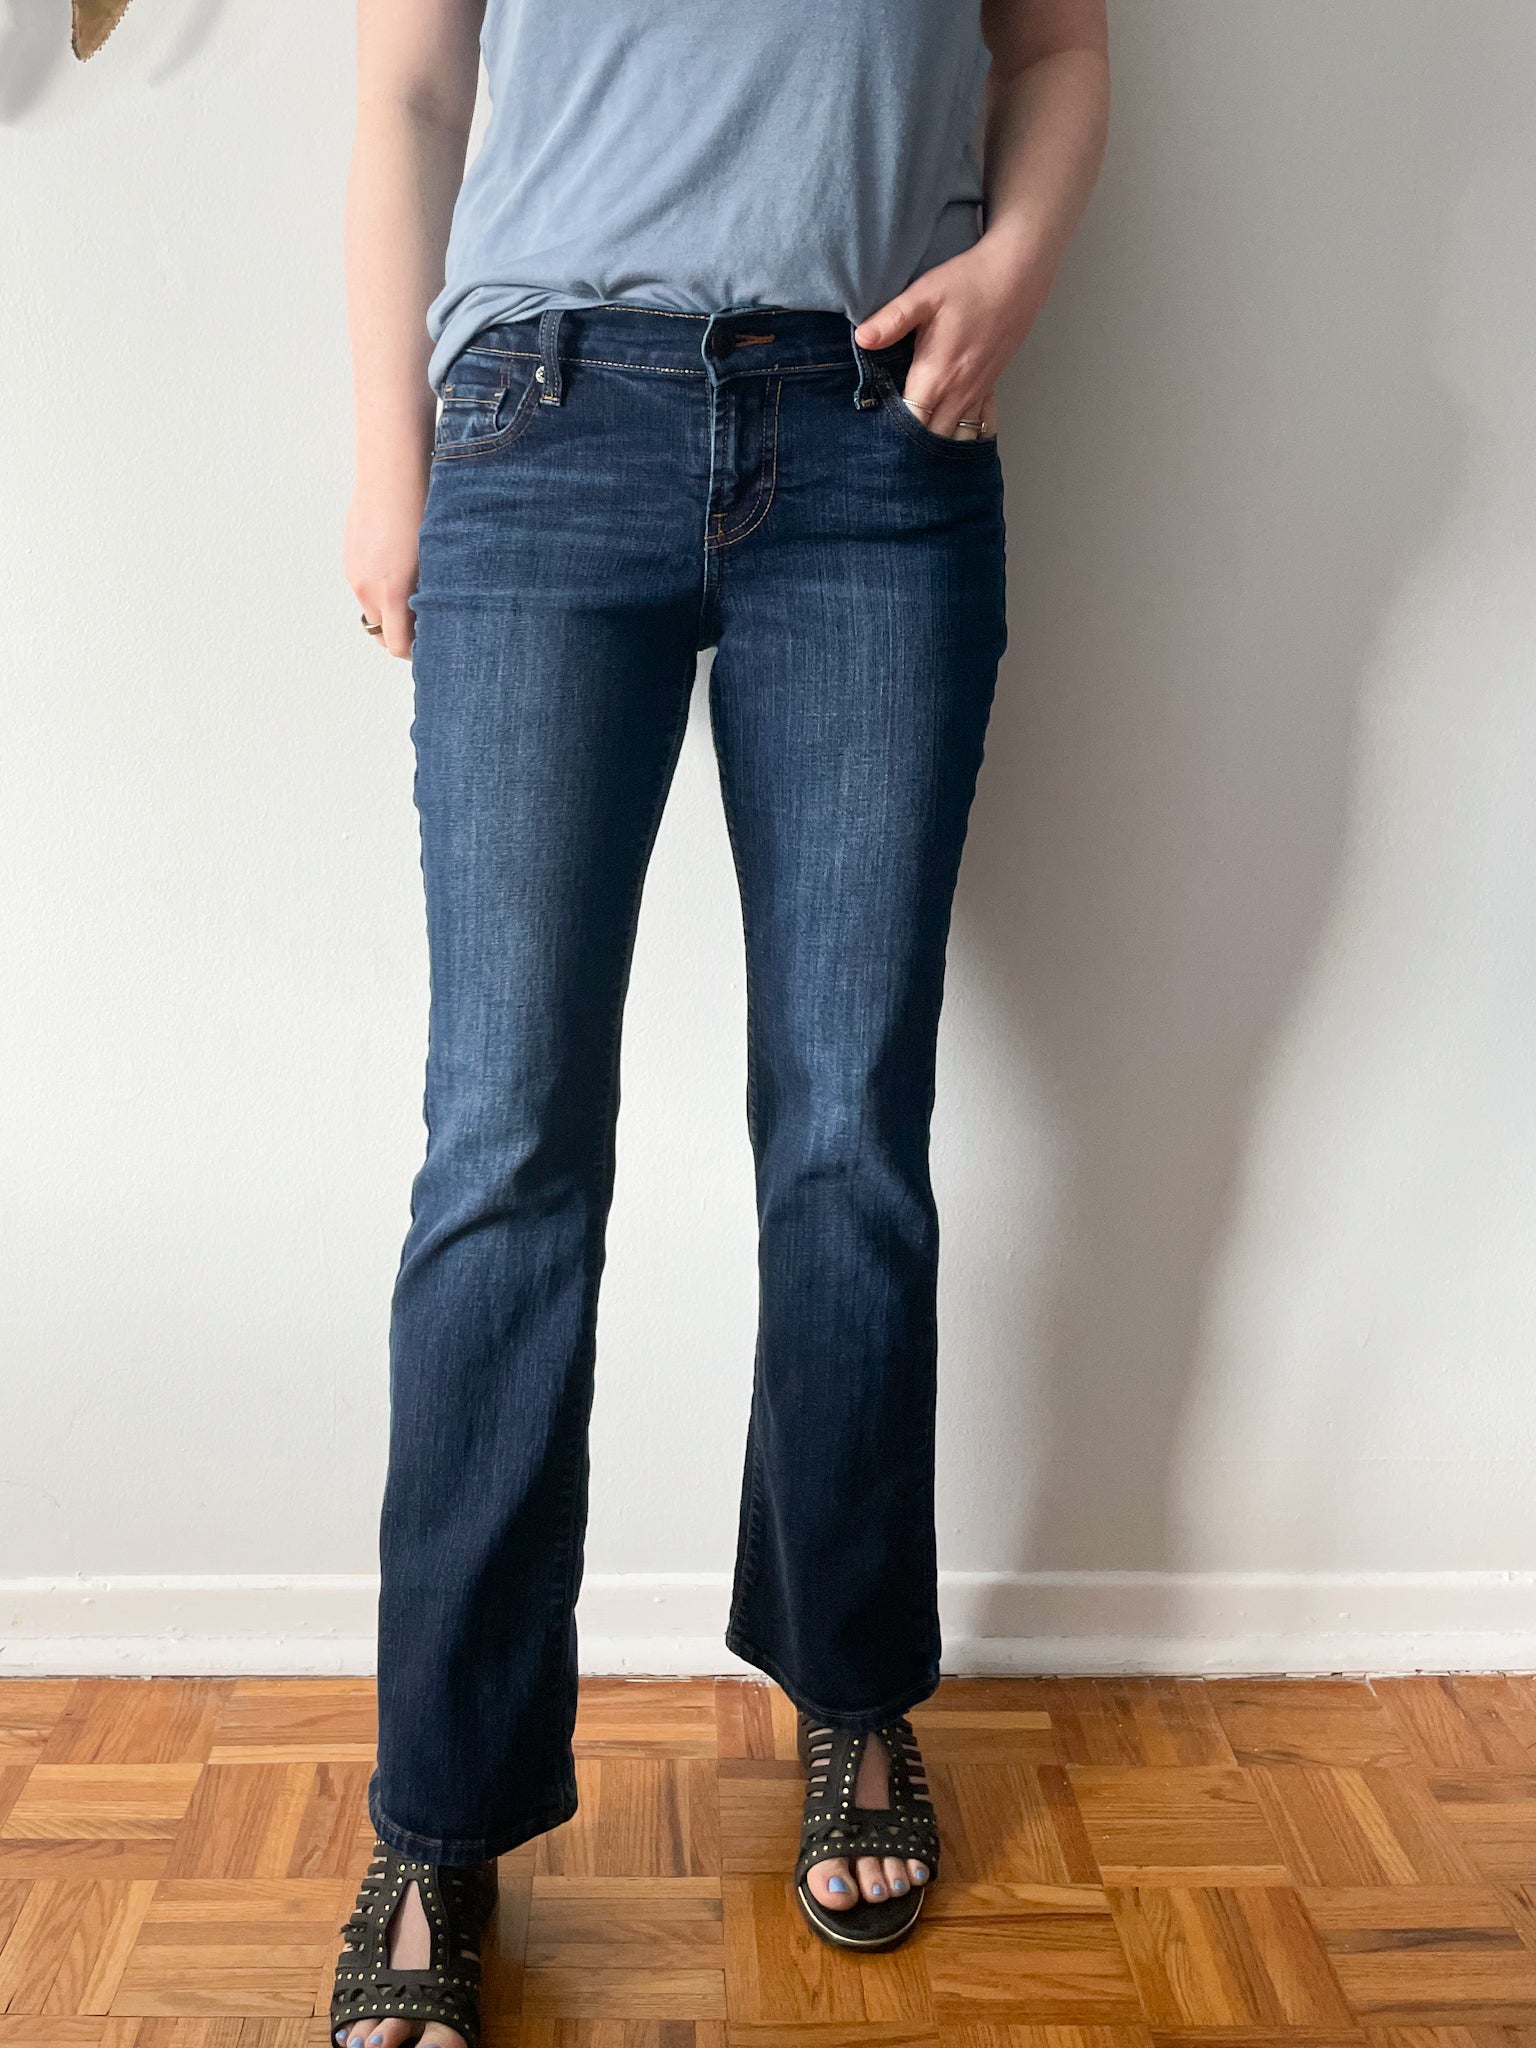 Old Navy Sweetheart Dark Wash Mid Rise Straight Leg Jeans - Size 2